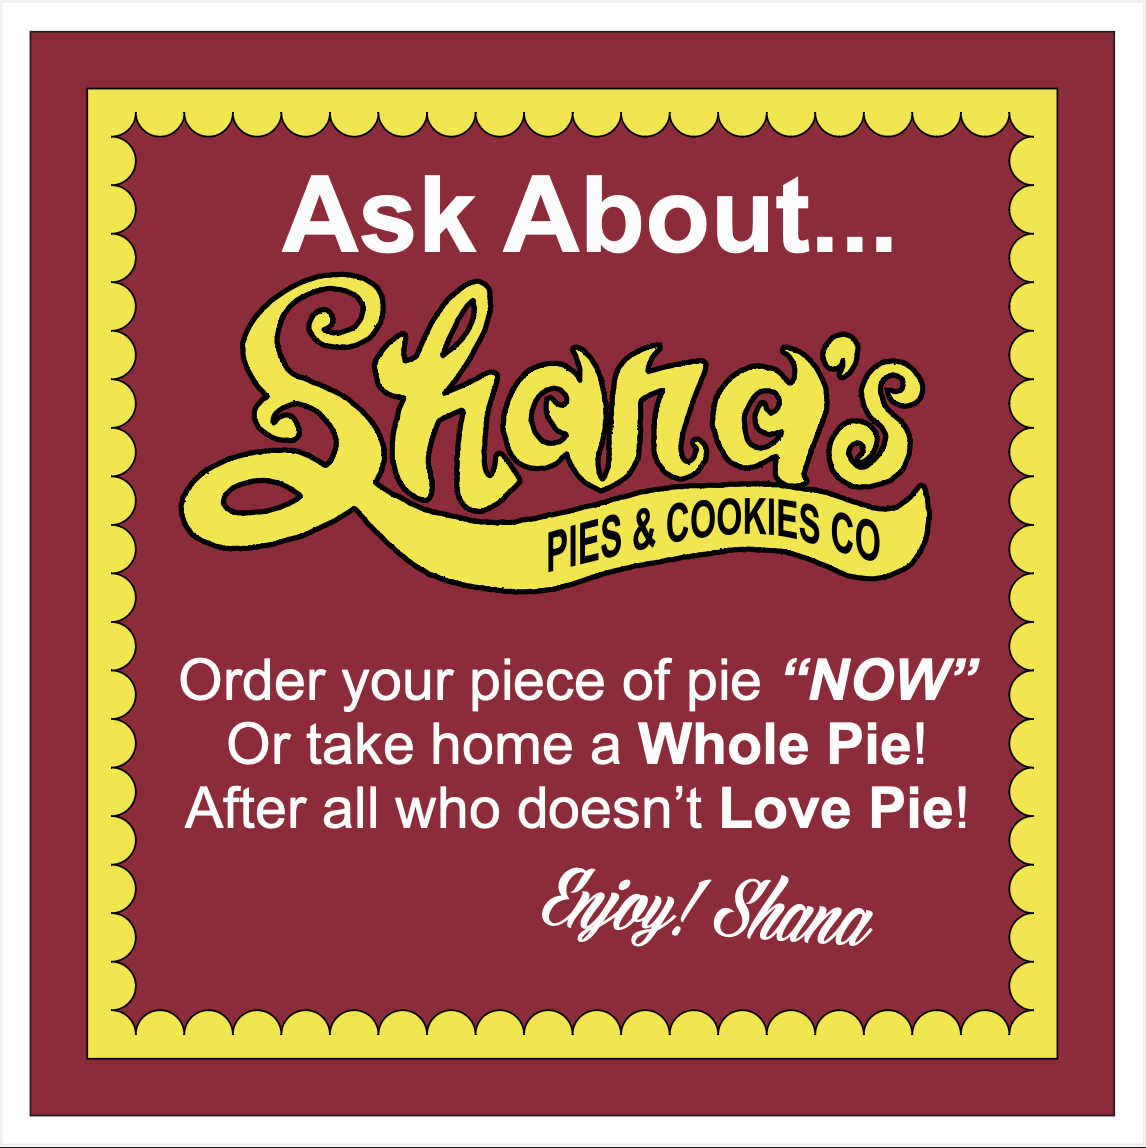 Shana's Pie & Cookie Co Sign